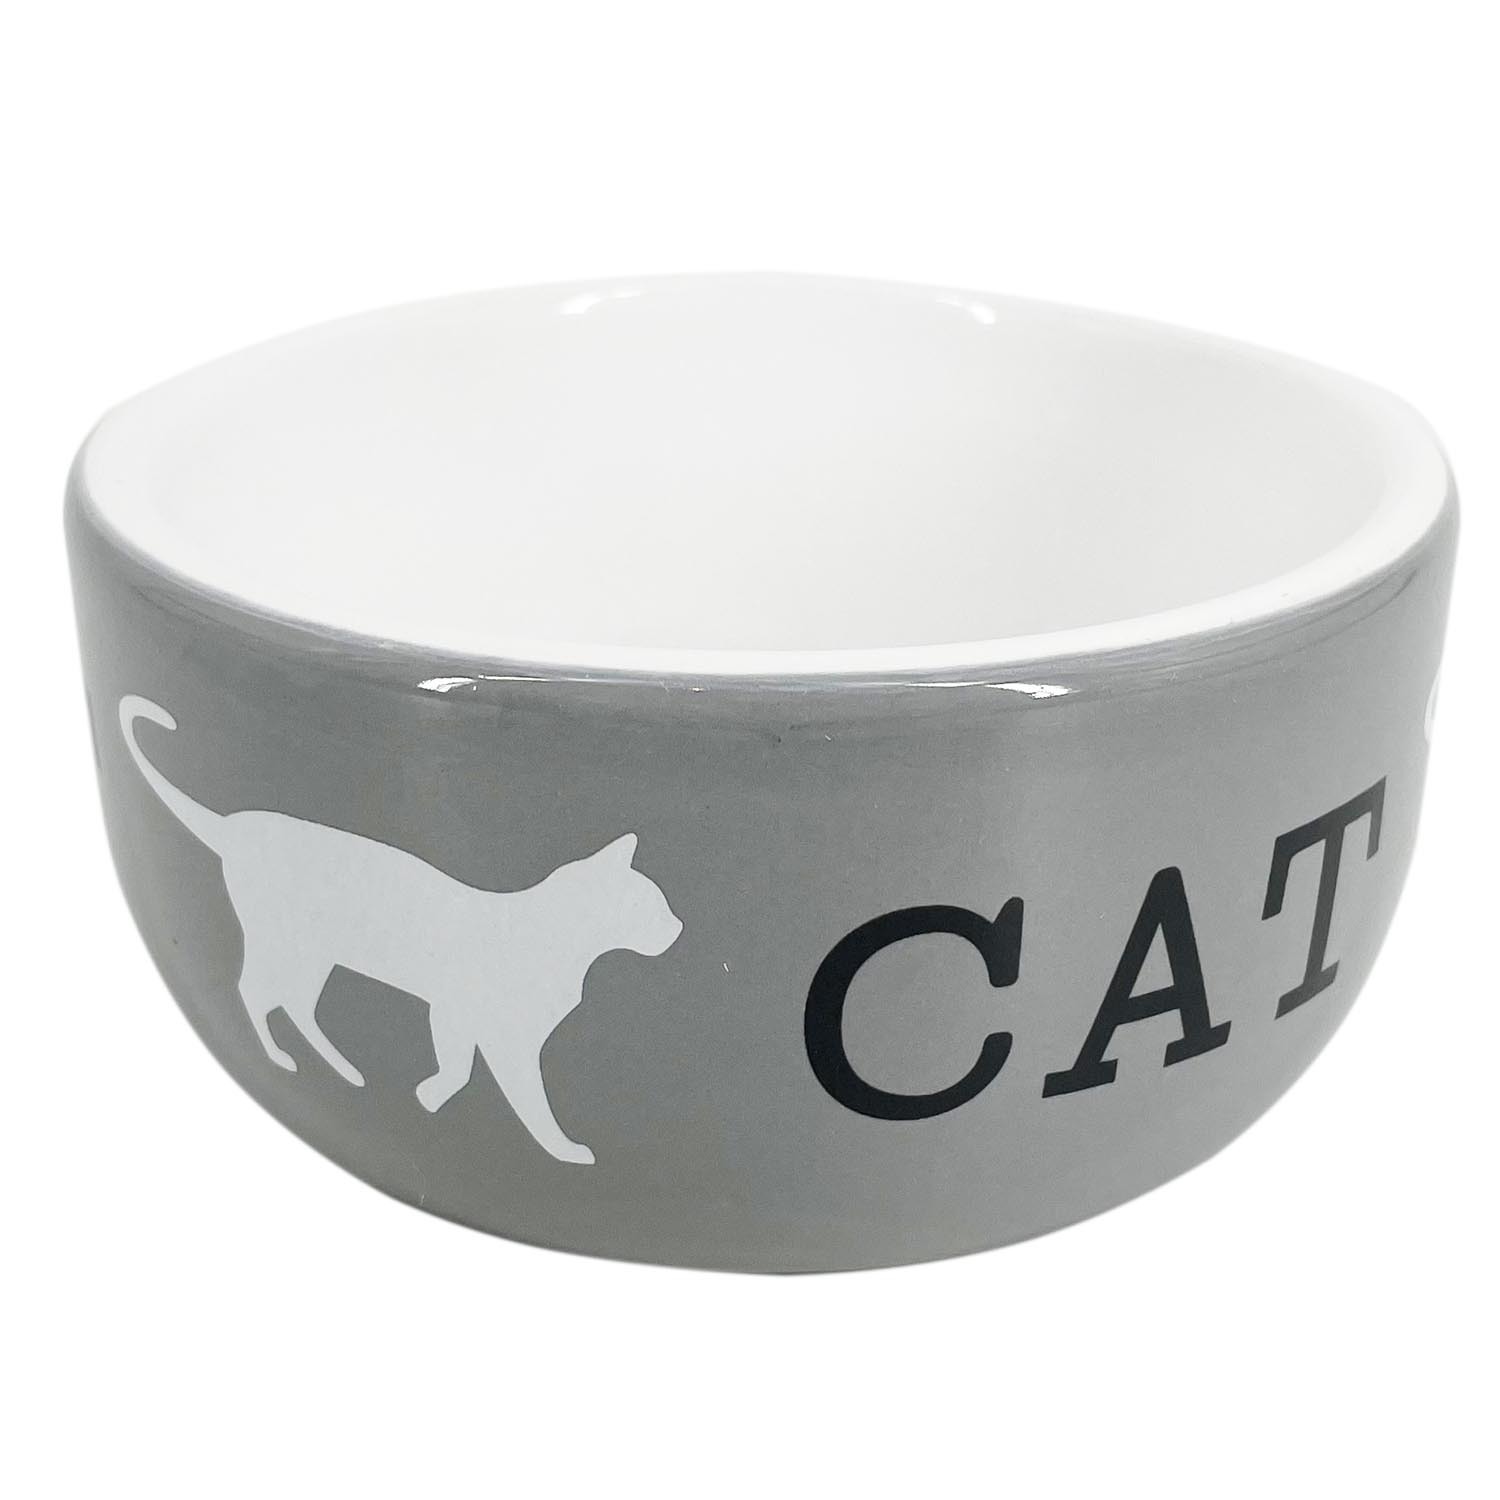 Single Clever Paws Cat Bowl in Assorted styles Image 1